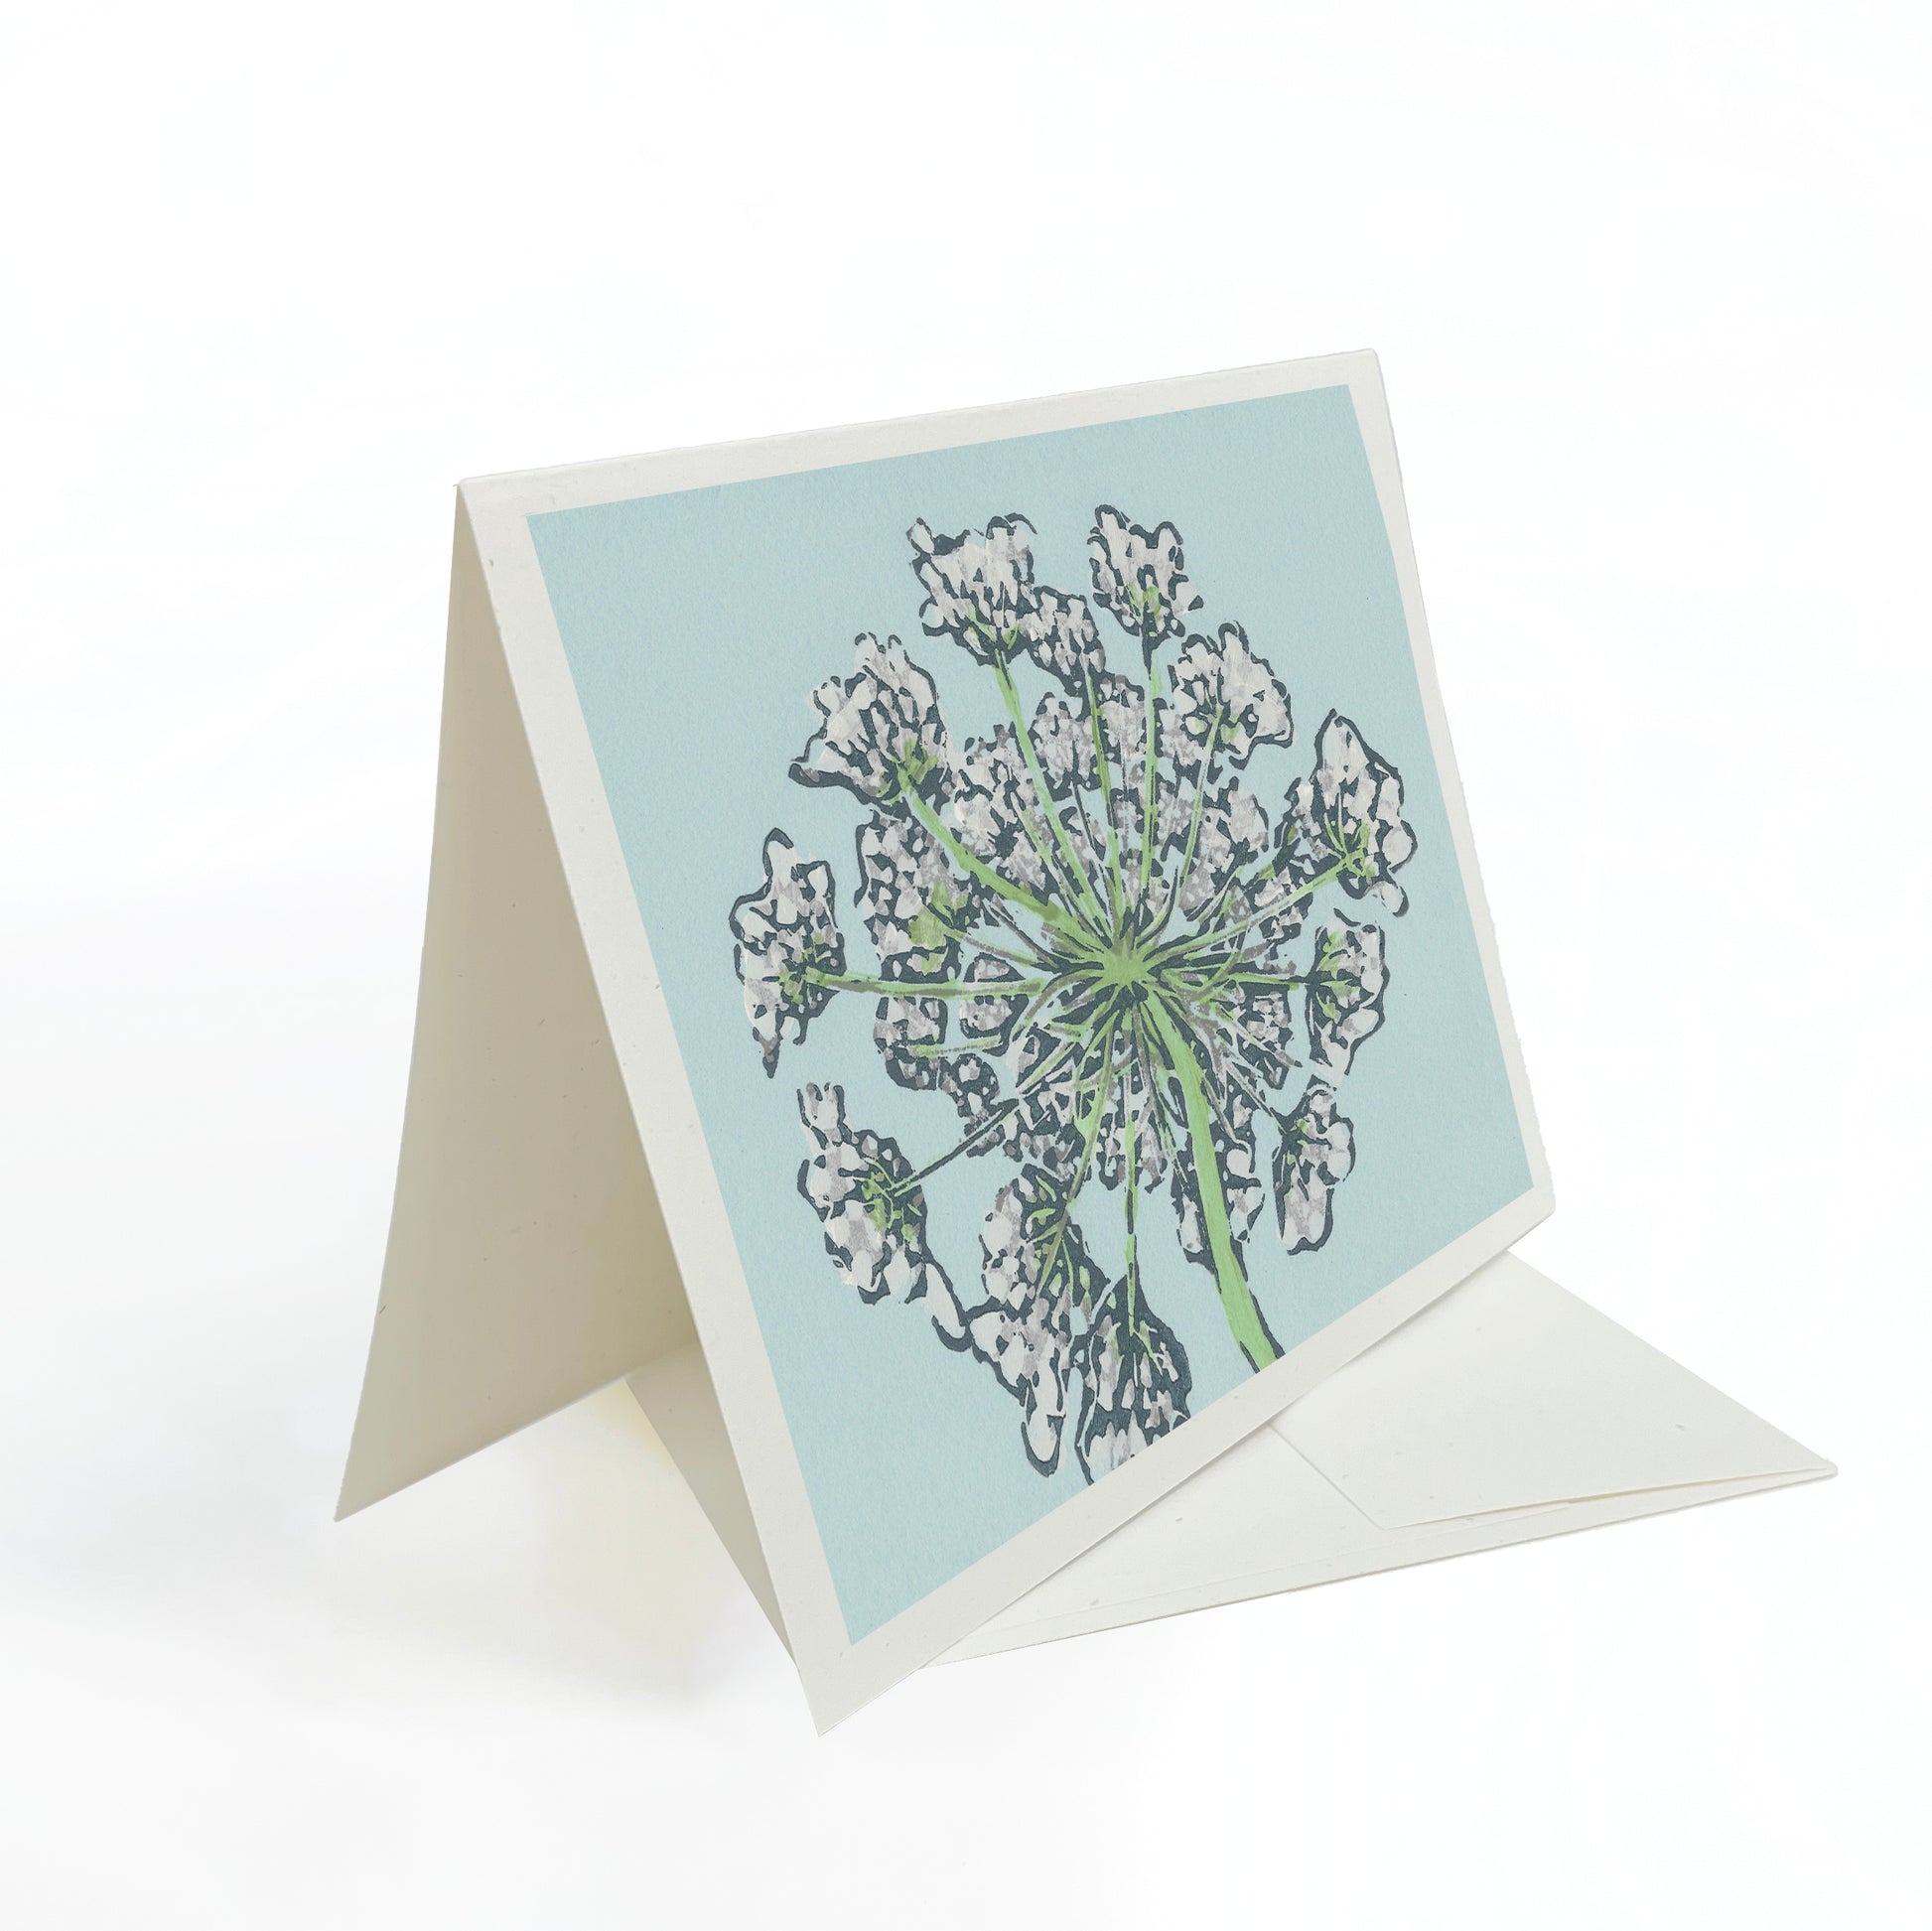 A casually elegant card featuring Michigan wildflowers art by Natalia Wohletz titled Queen Anne's Lace.